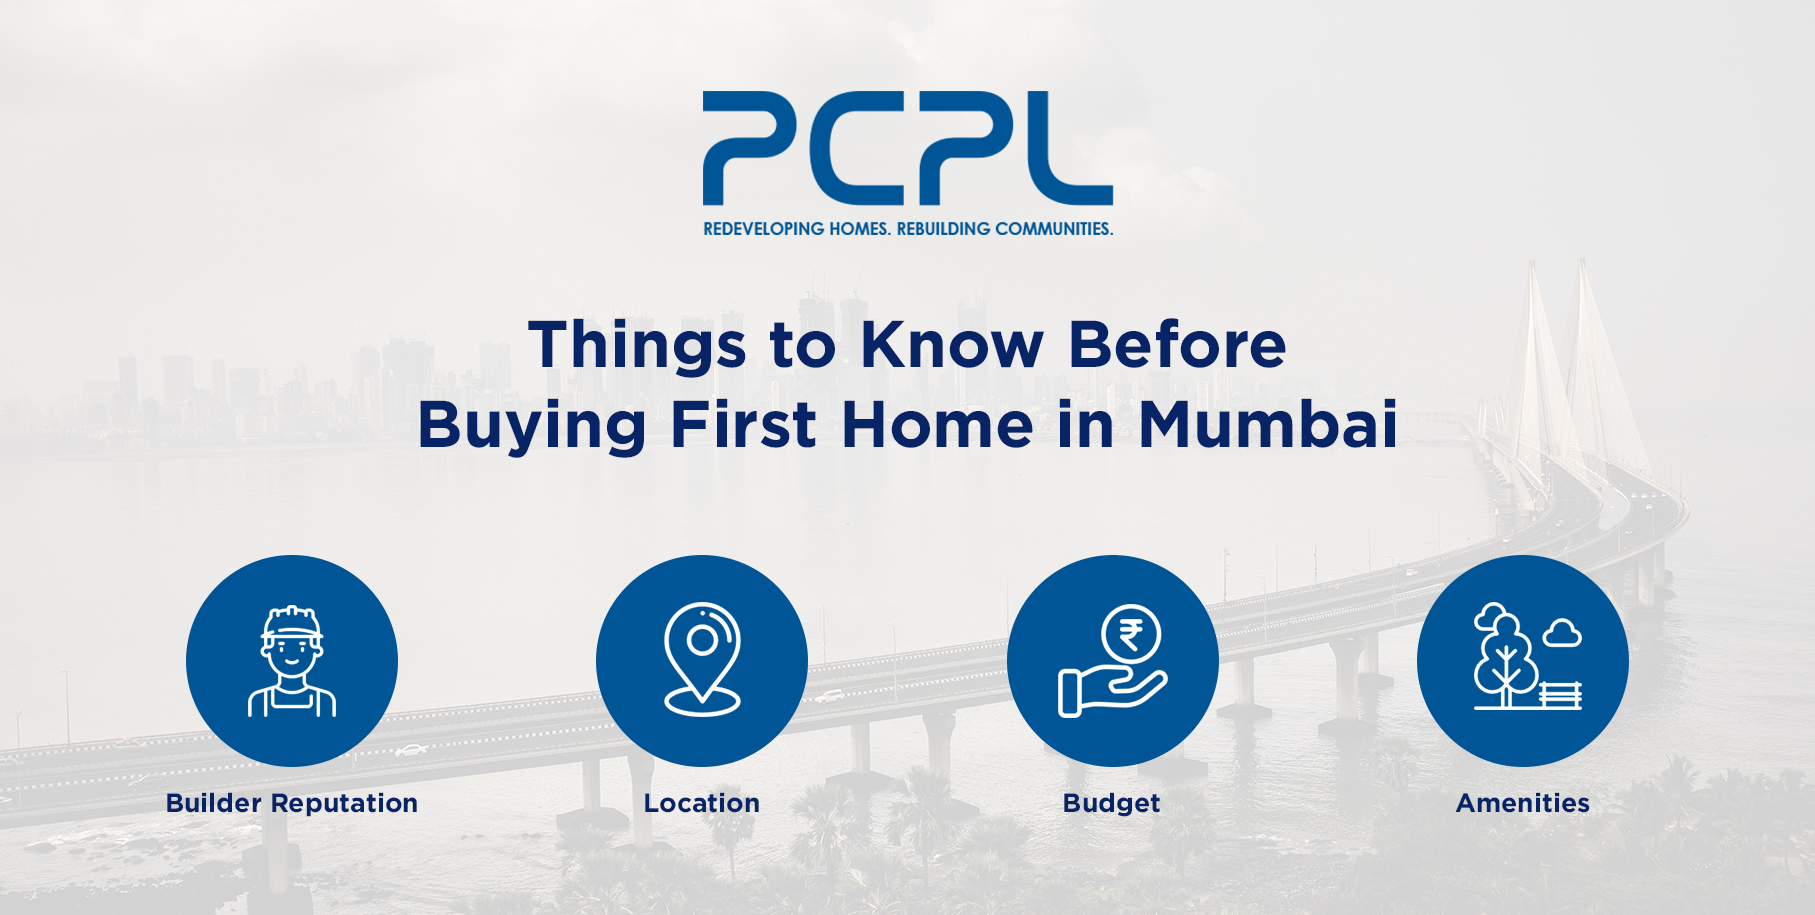 Things to Know Before Buying First Home in Mumbai